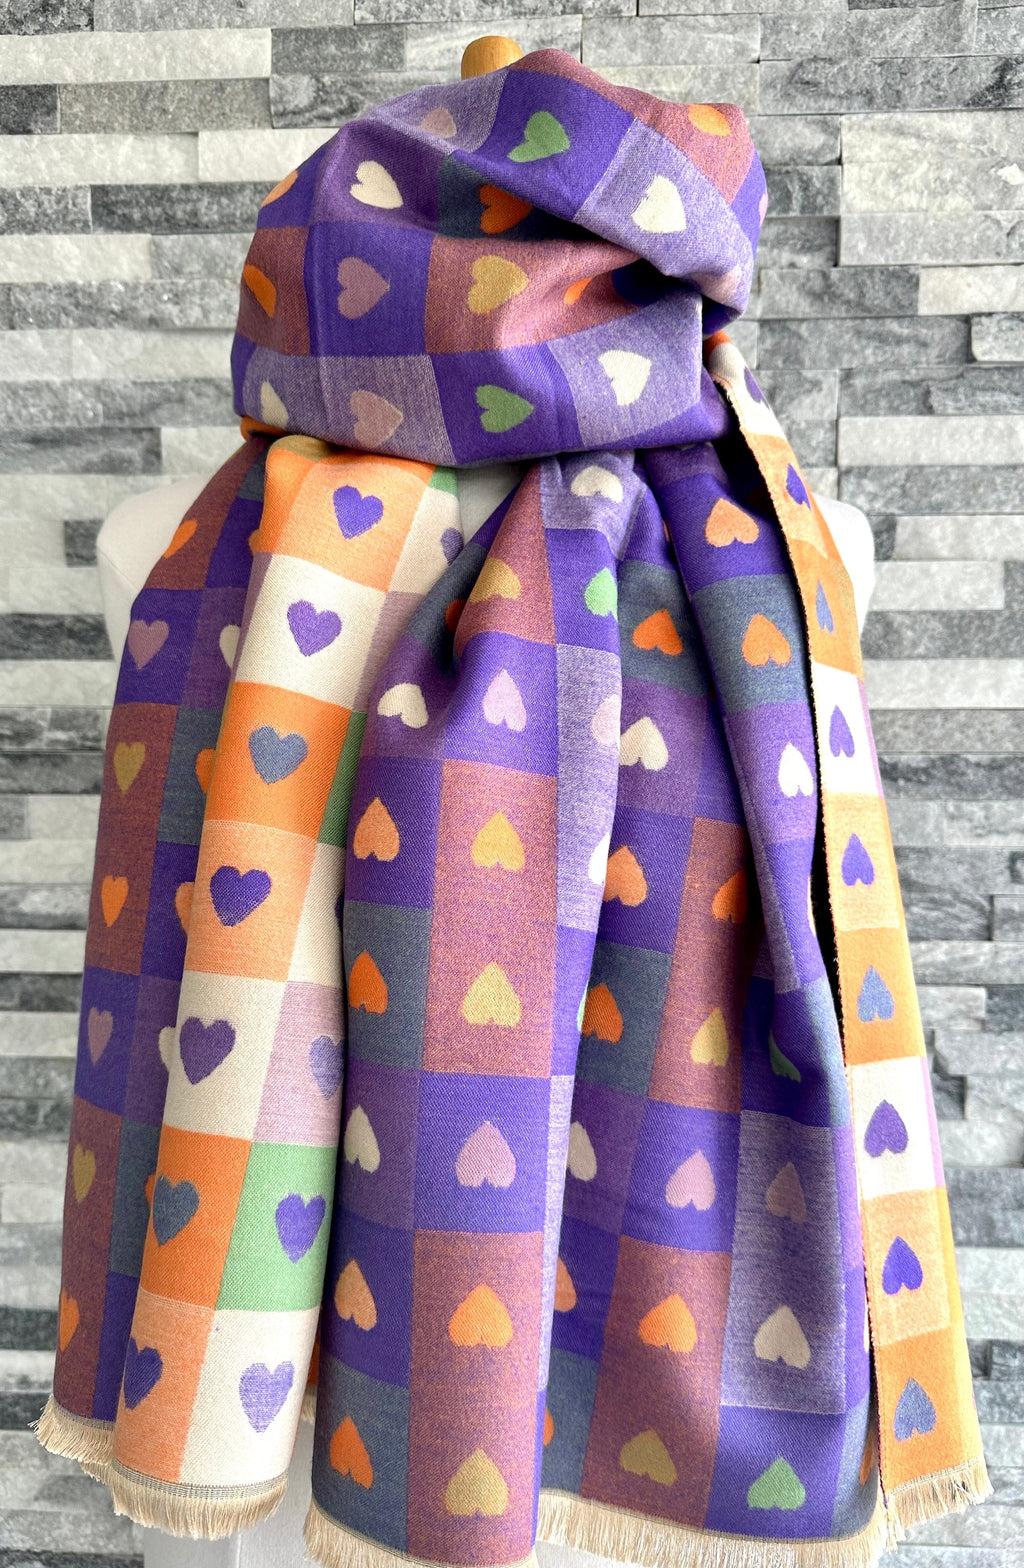 lusciousscarves Lavender Purple Reversible Hearts and Checks Design Scarf.